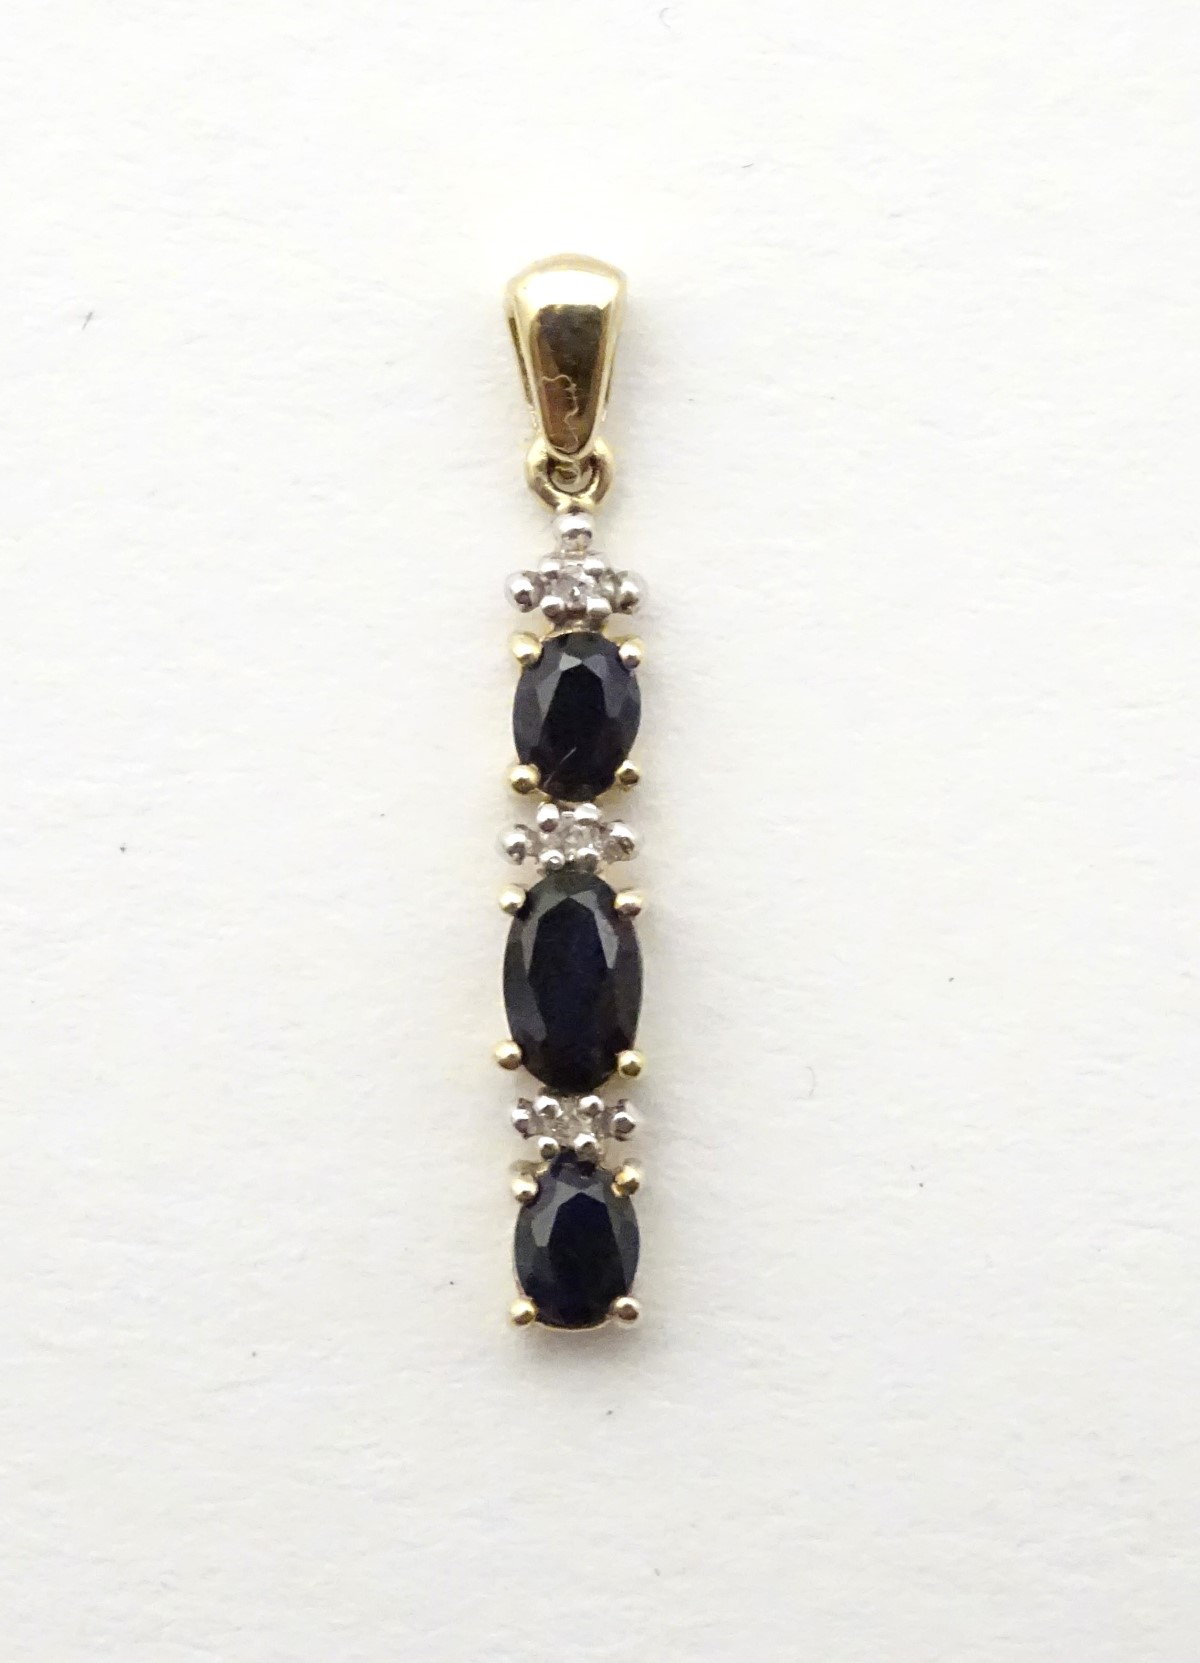 A 9ct gold pendant set with spinels and diamonds, 1” long. - Image 5 of 6